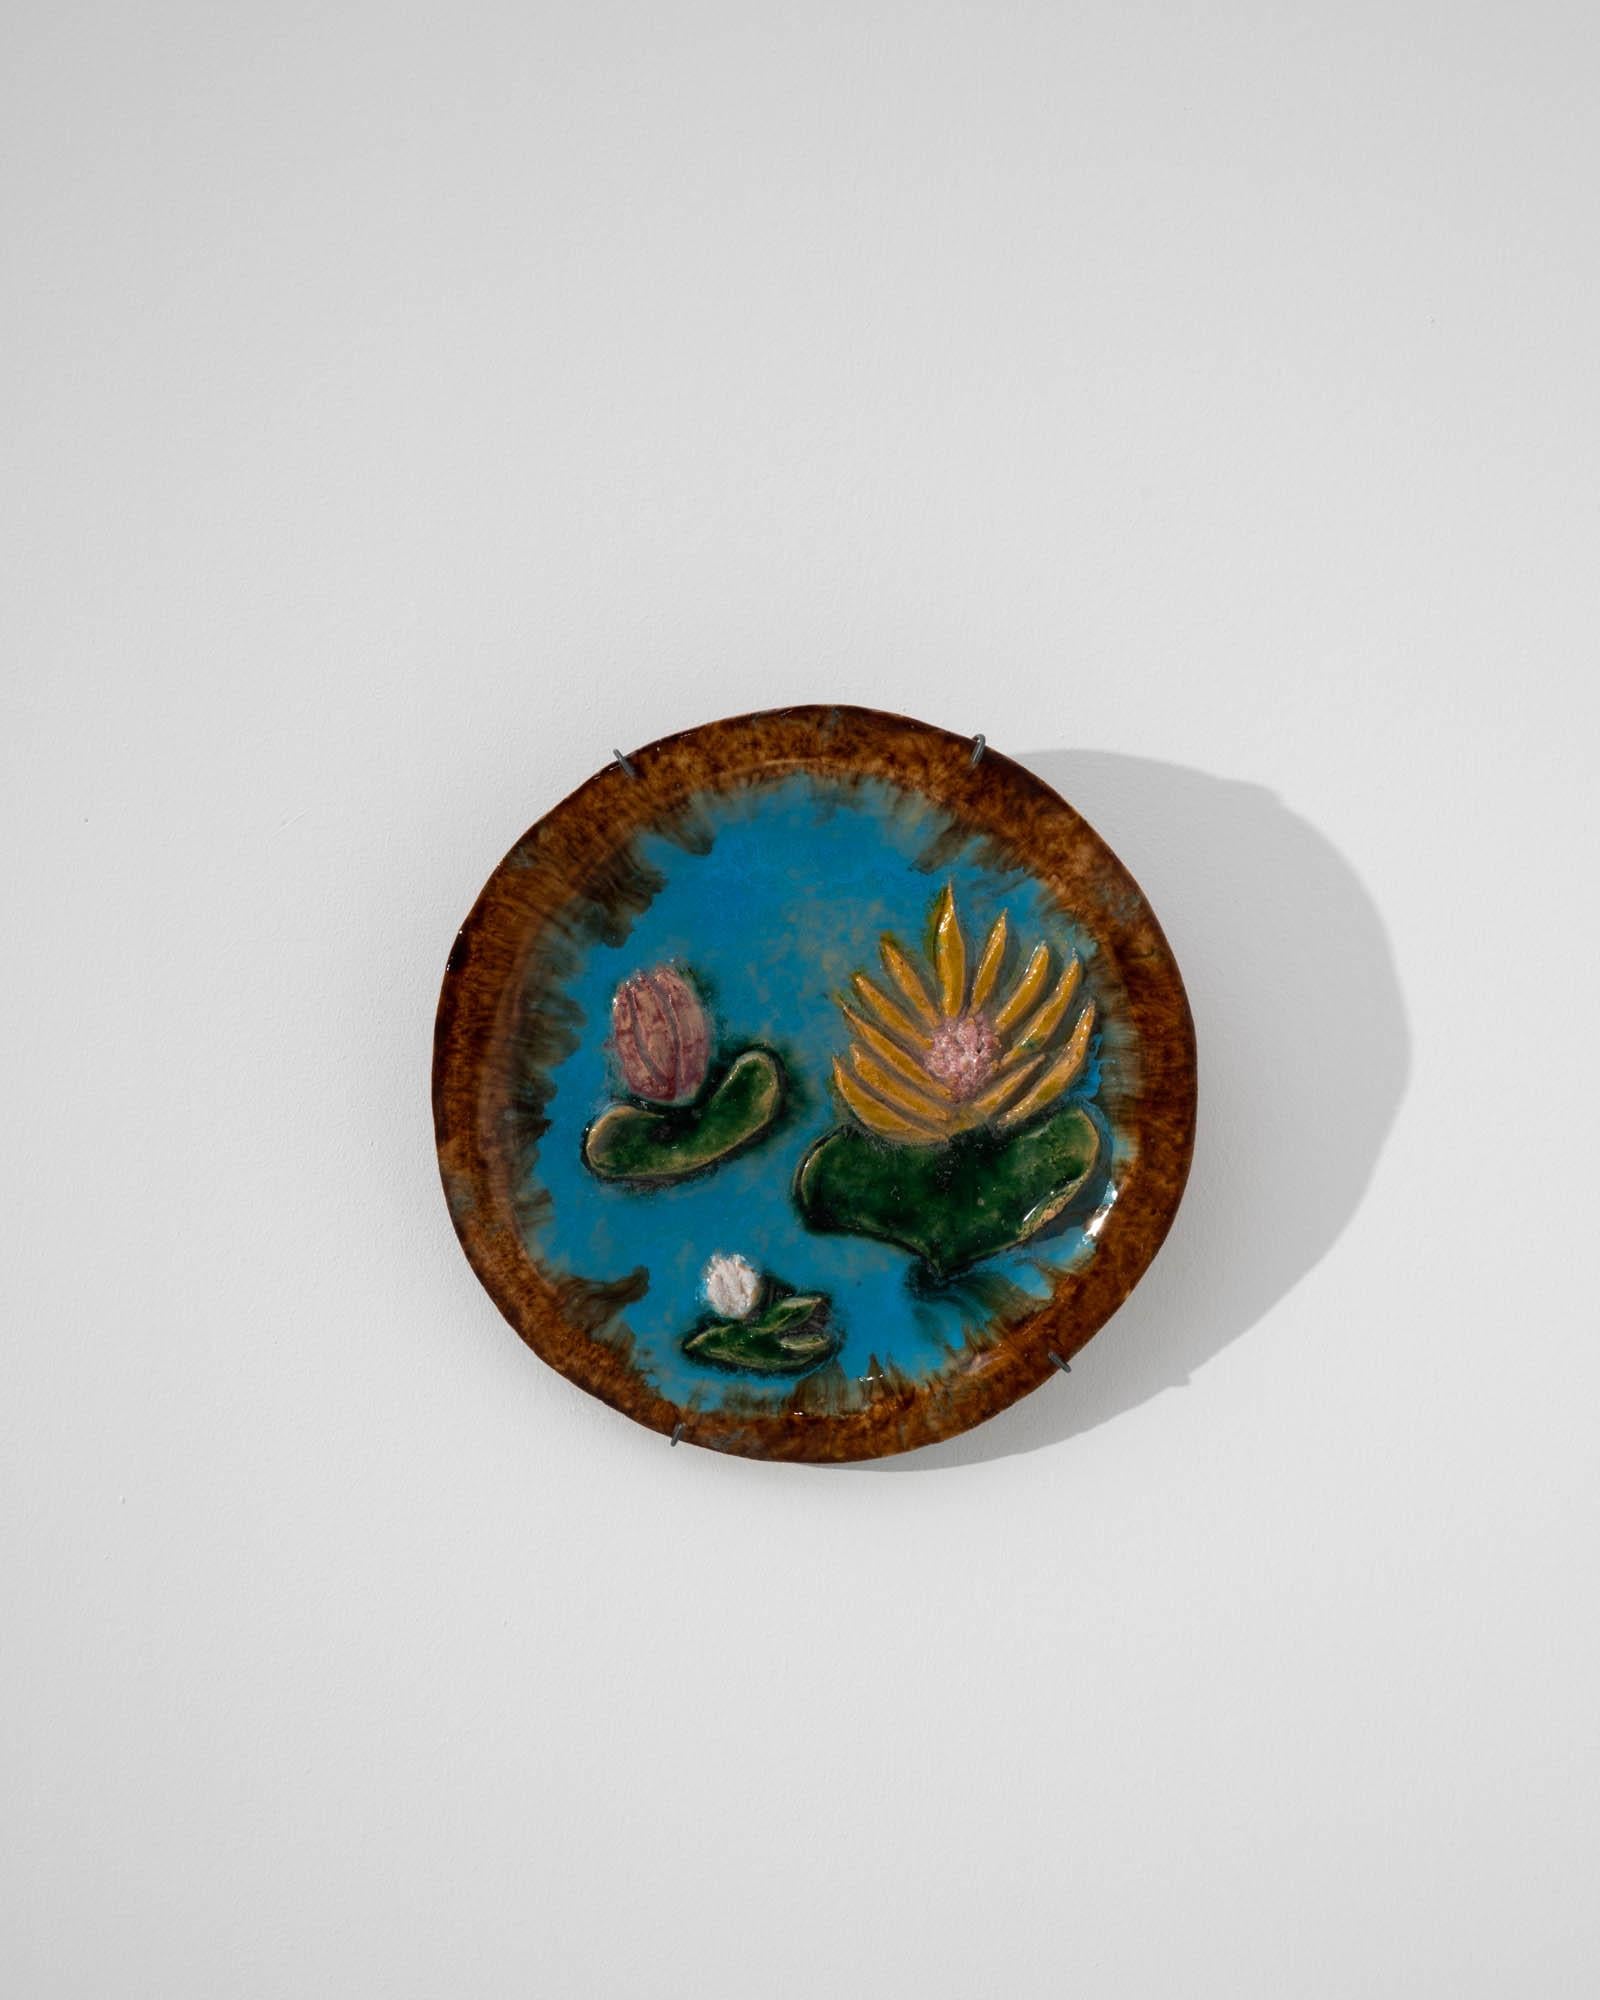 A ceramic wall decoration created in 1960s Belgium. Pastel, brimming with 1960s charm, with a tasteful patina, enigmatically playful wall decoration brings warmth and a decorative flair to the room. Three lily pads, with colorful flowers, wreathed